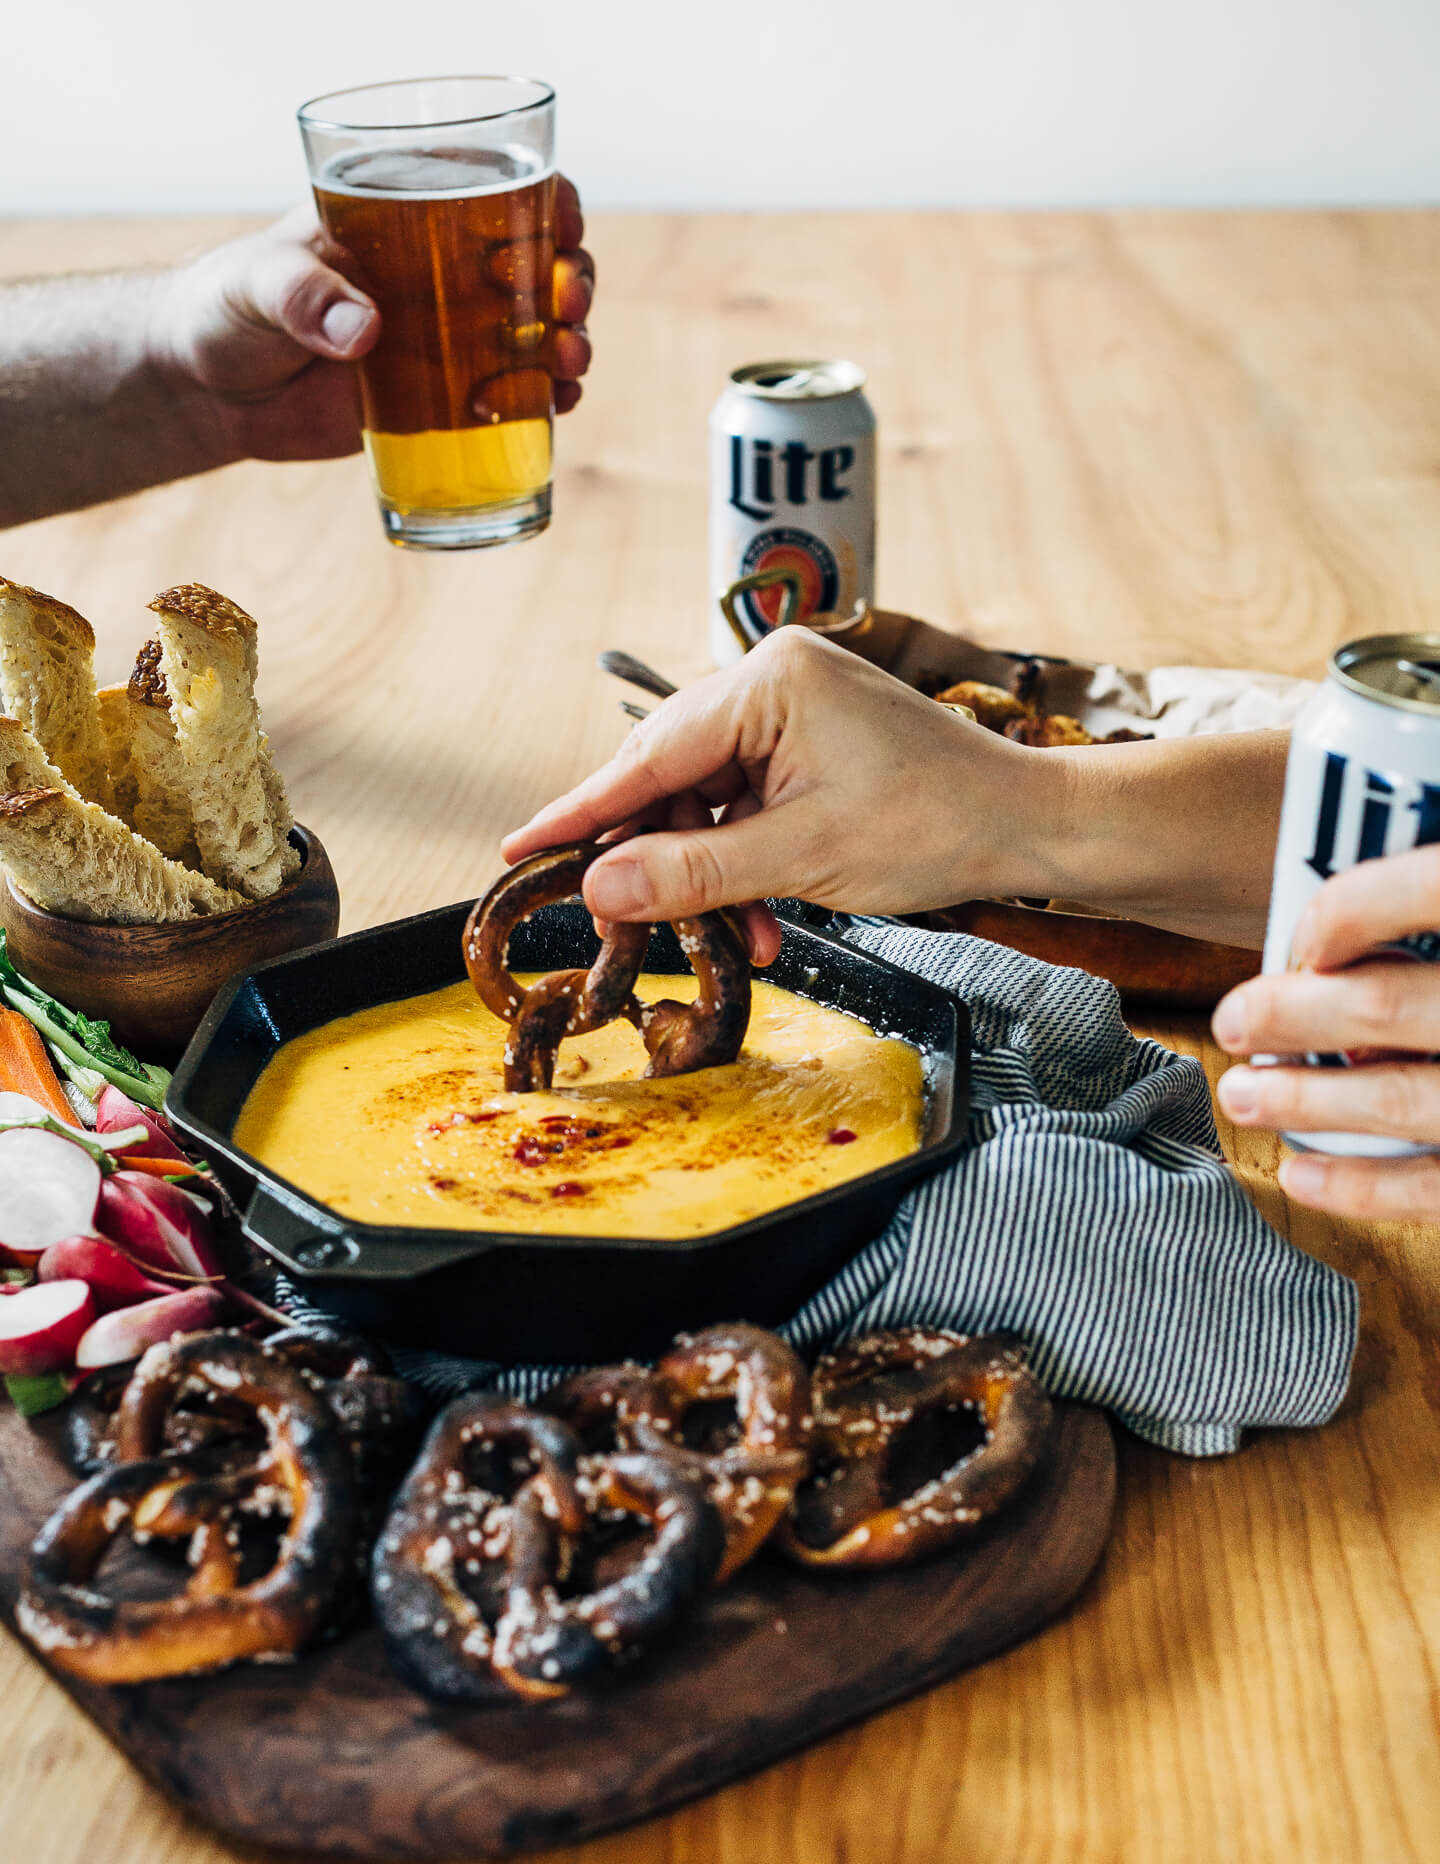 A simple, classic beer cheese recipe served alongside crispy fried cauliflower bites, toast soldiers, and crunchy dark pretzels.